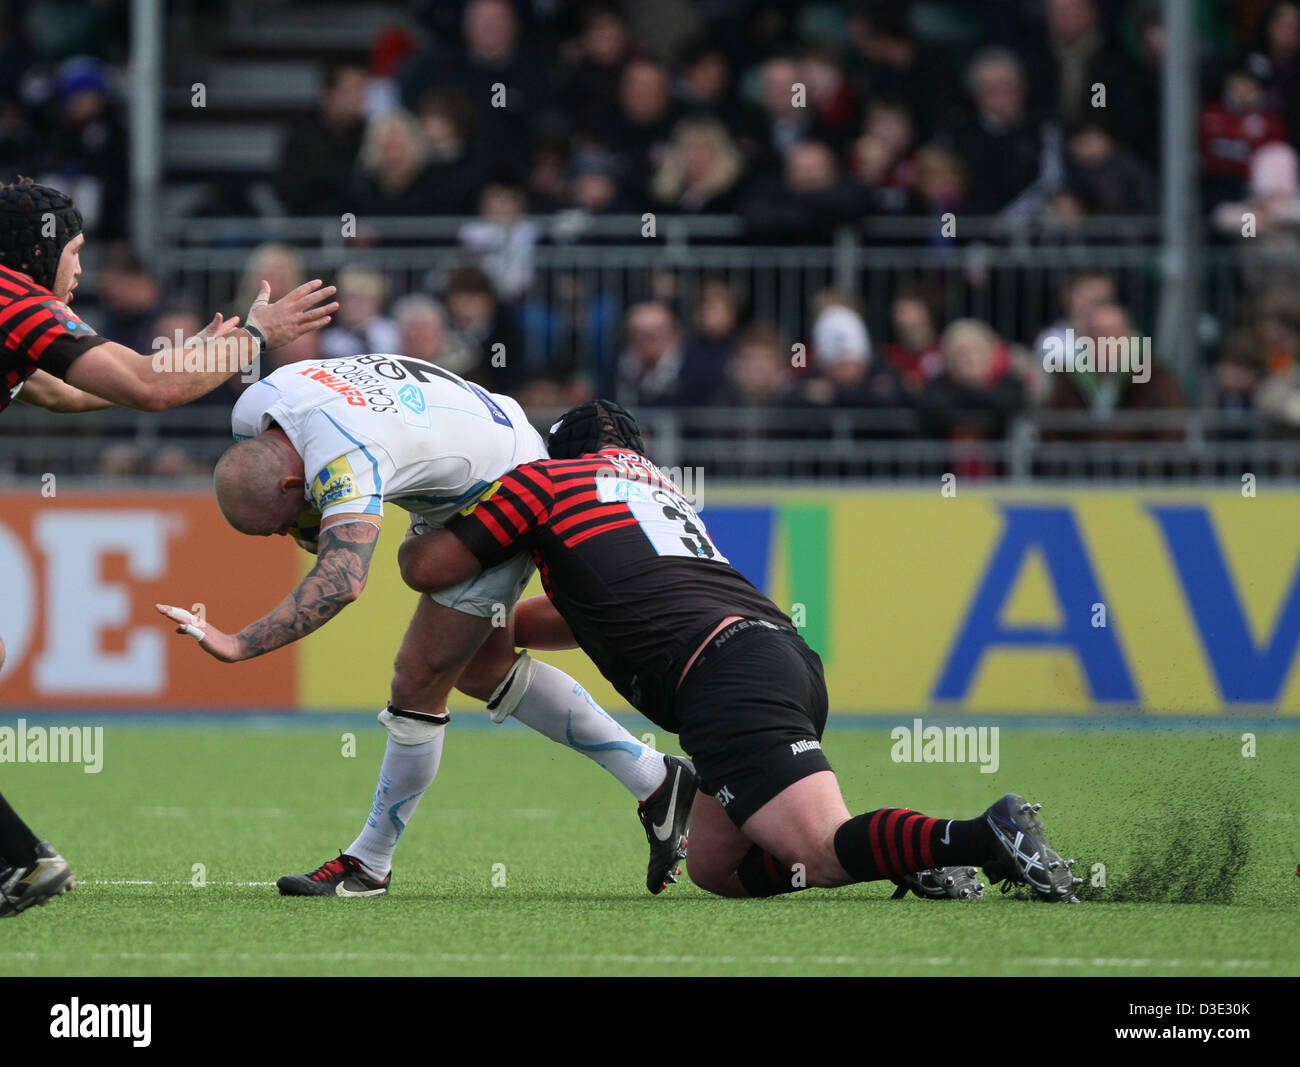 Hendon, North London, UK   Saracens v Exeter Chiefs rugby   February 16, 2013 Matt Stevens (S) slips as the artificial surface kicks up slightly whilst he tackles James Scaysbrook (EC). Pic: Paul Marriott Photography/Alamy Live News Stock Photo